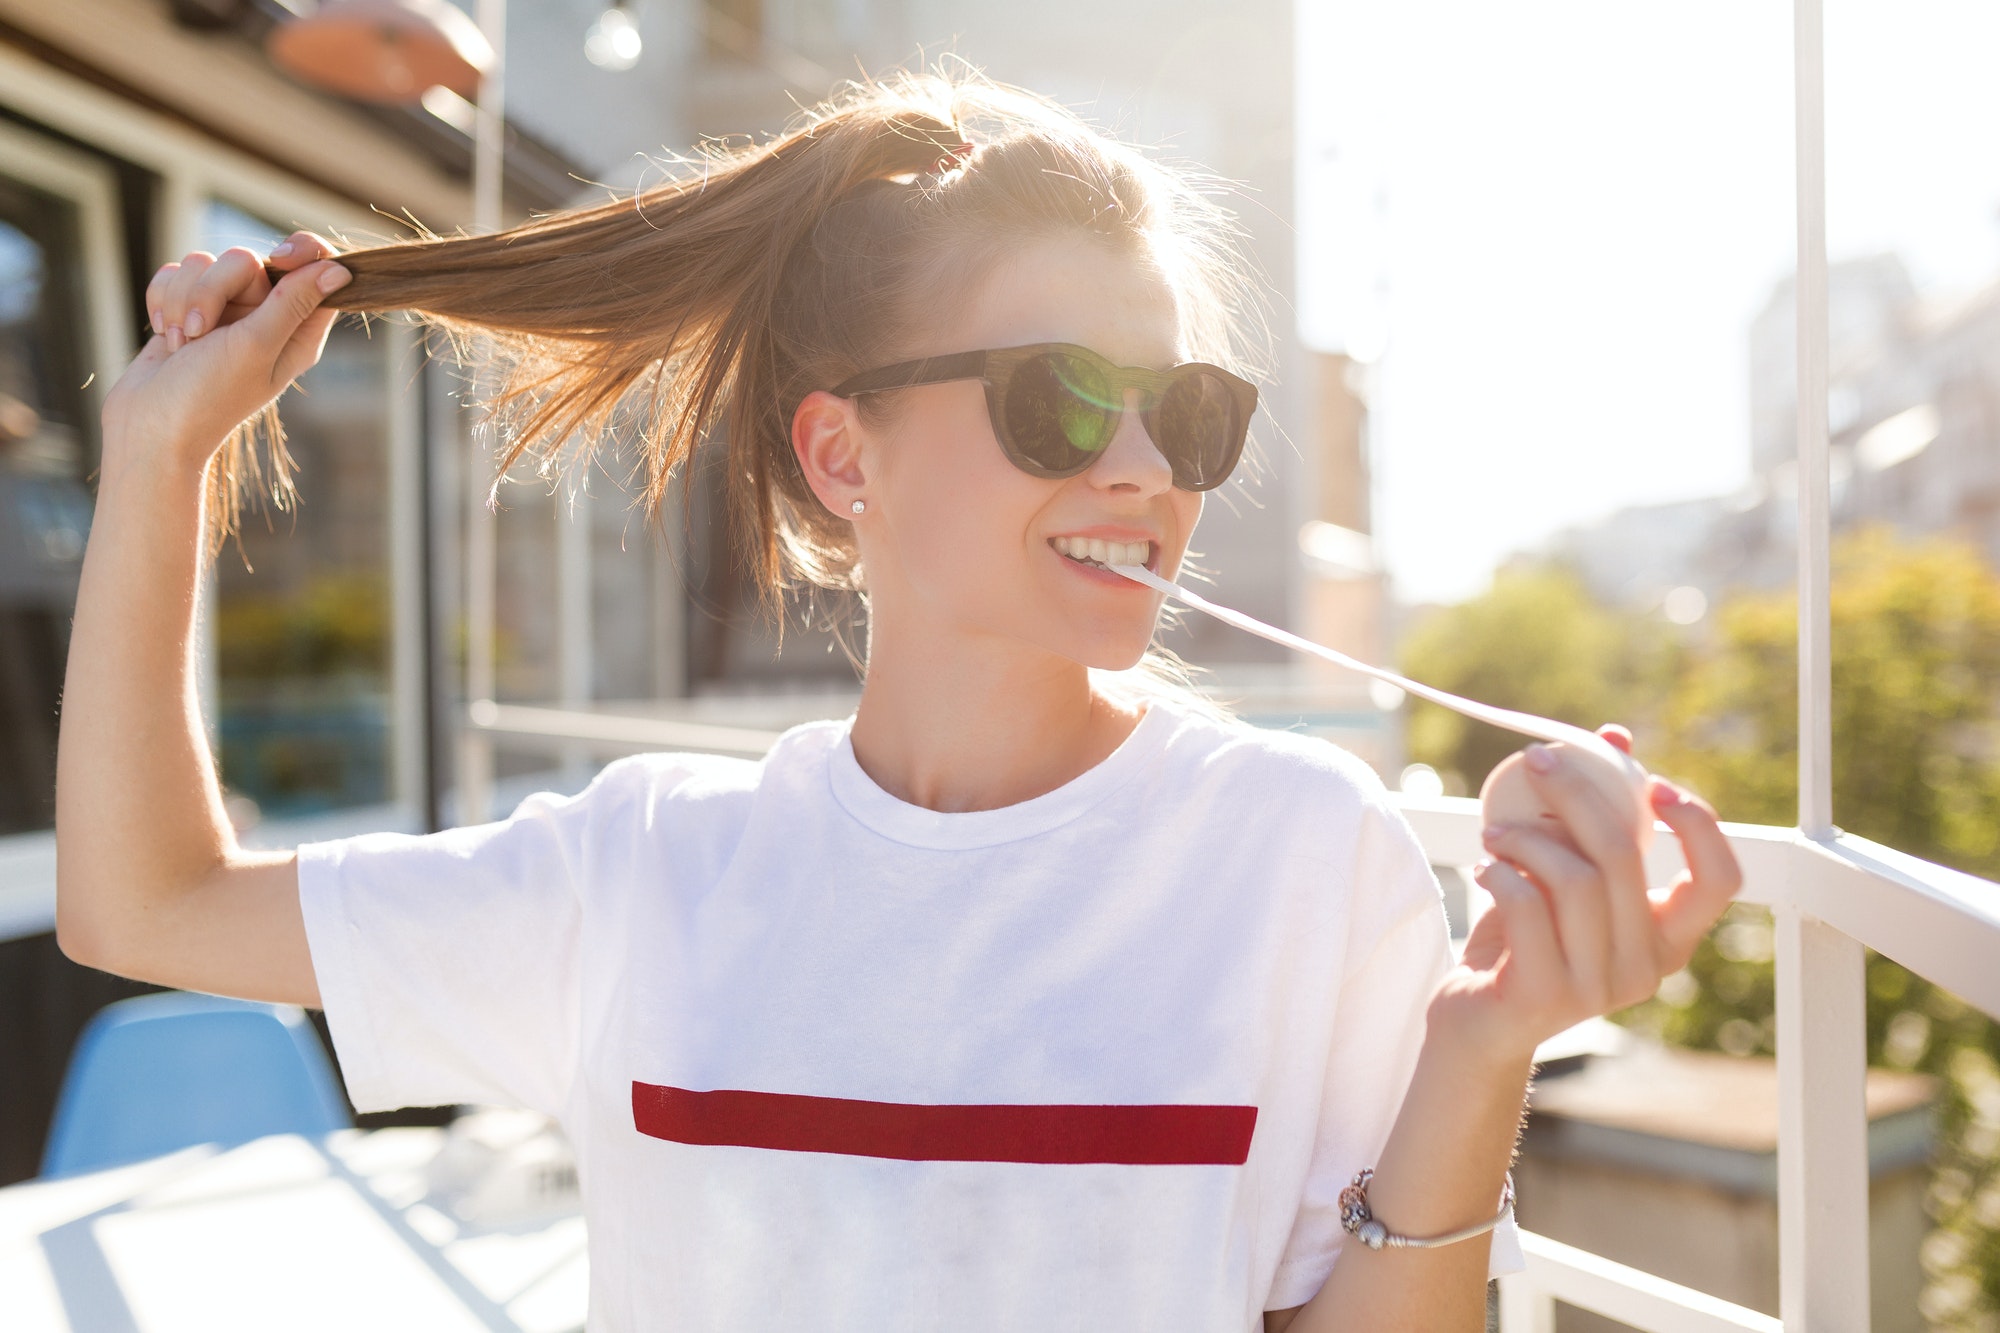 Funny excited joyful girl with tail dressed white shirt and sunglasses pulls the tail